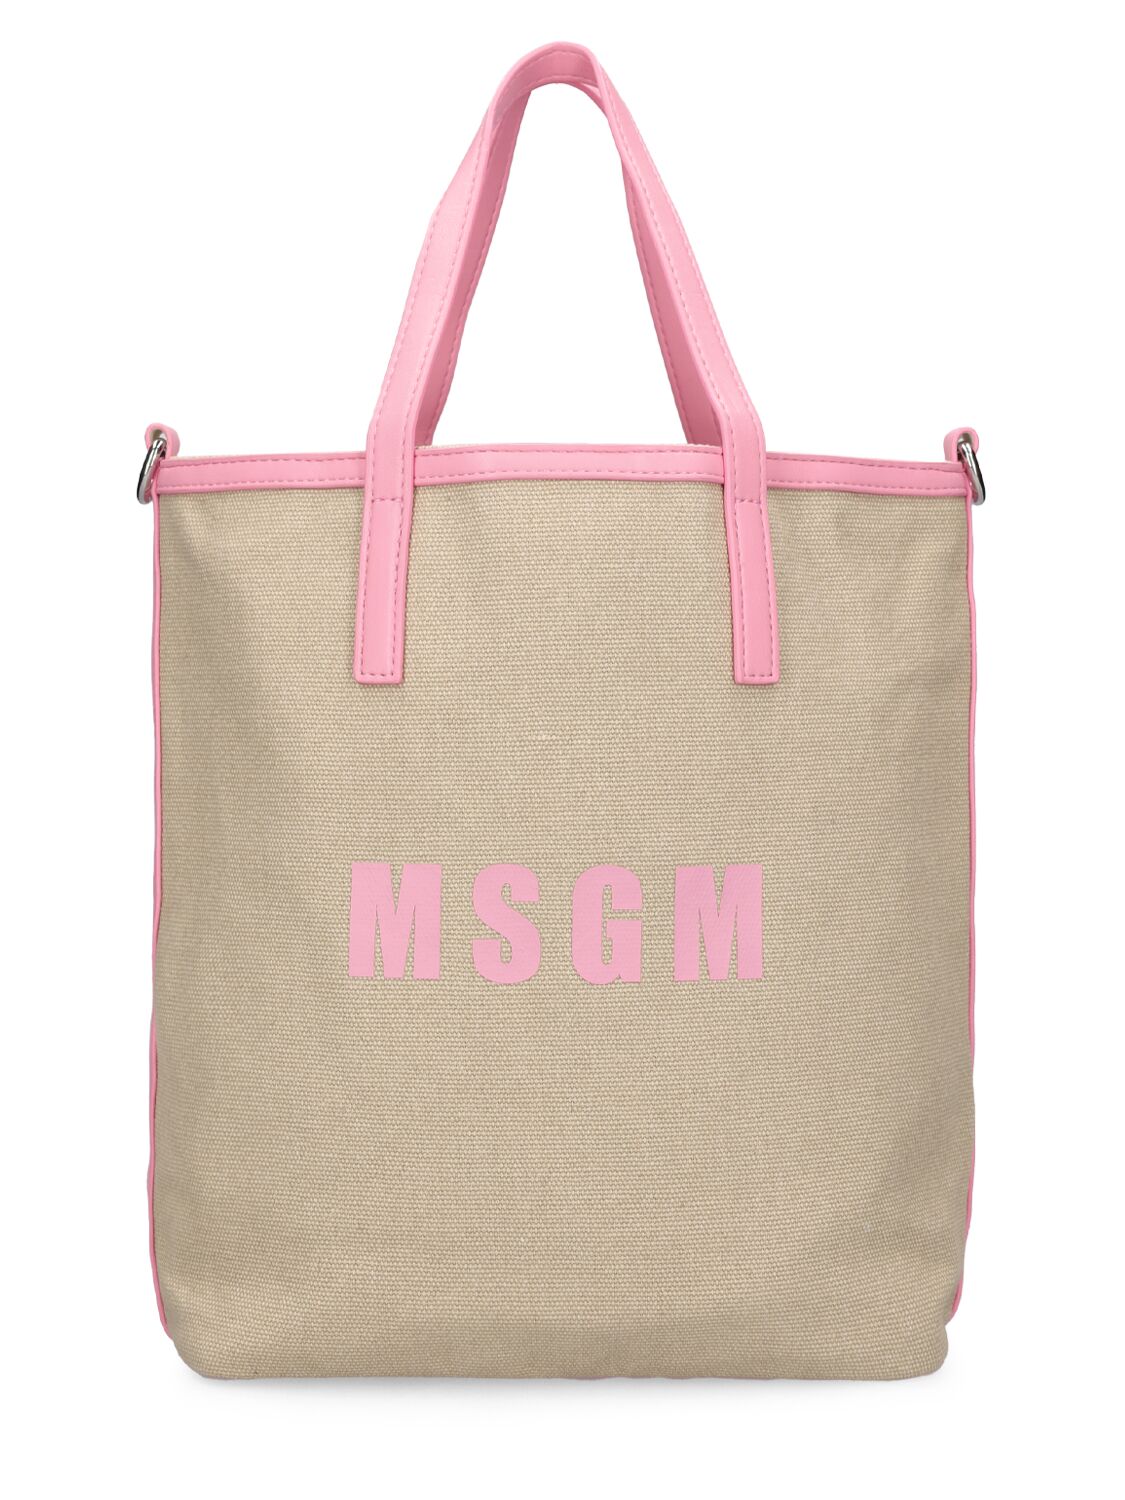 Msgm Small Canvas Shopping Bag In Pink